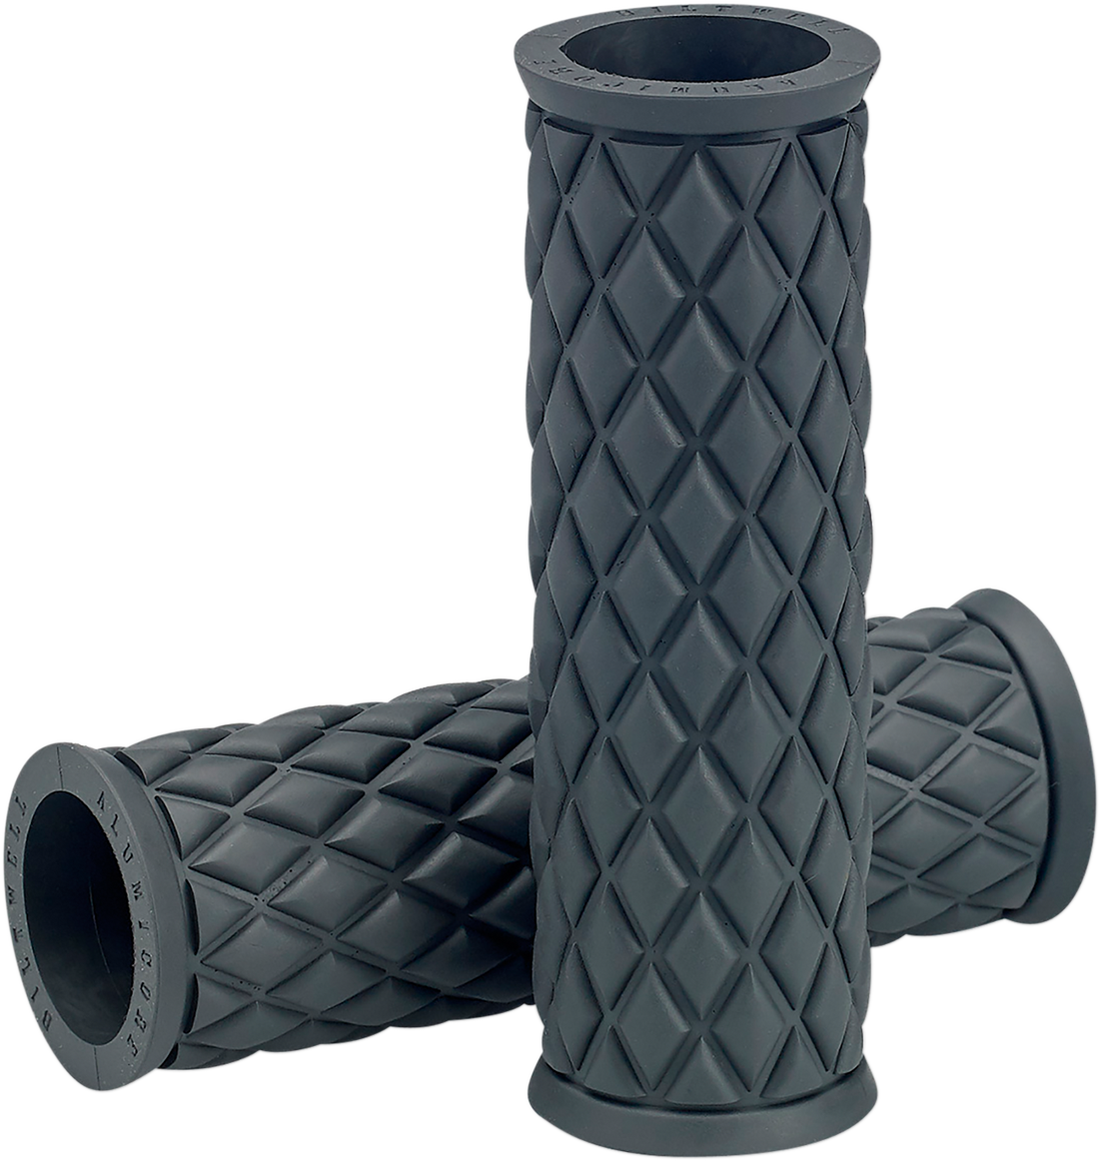 0630-2328 - BILTWELL Grips - Alumicore - Replacement - Gray 6706-0501